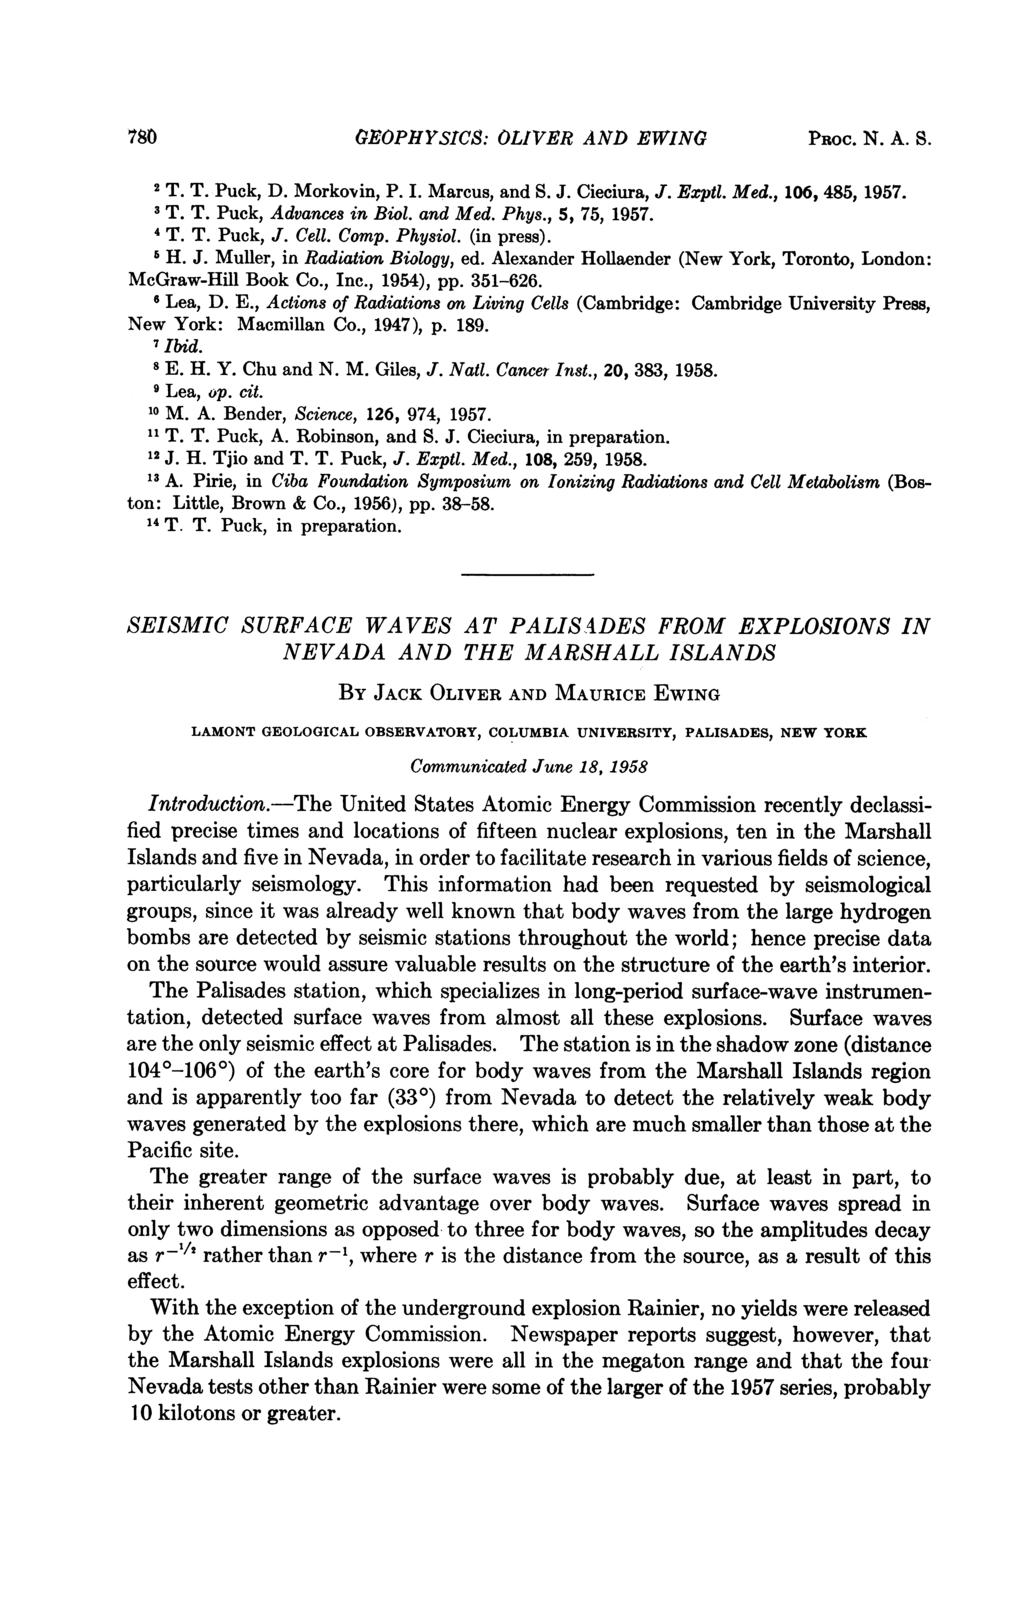 78078GEOIPHYSICS: OLIVER AND EWING PRoc. N. A. S. 2 T. T. Puck, D. Morkovin, P. I. Marcus, and S. J. Cieciura, J. Exptl. Med., 106, 485, 1957. 3T. T. Puck, Advances in Biol. and Med. Phys.